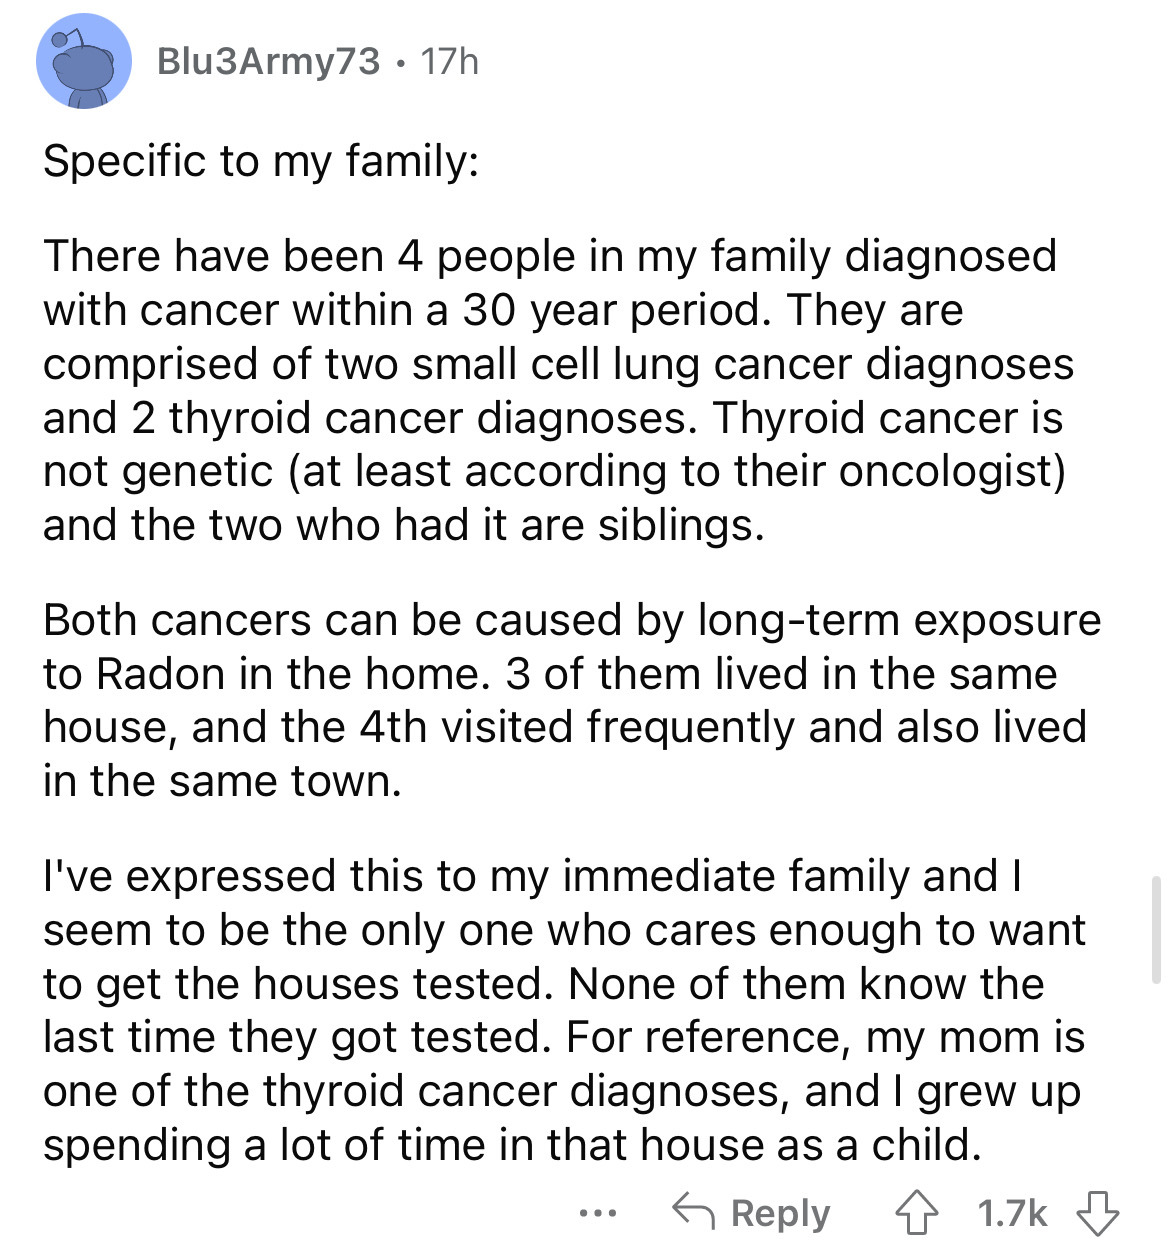 document - Blu3Army73. 17h Specific to my family There have been 4 people in my family diagnosed with cancer within a 30 year period. They are comprised of two small cell lung cancer diagnoses and 2 thyroid cancer diagnoses. Thyroid cancer is not genetic 